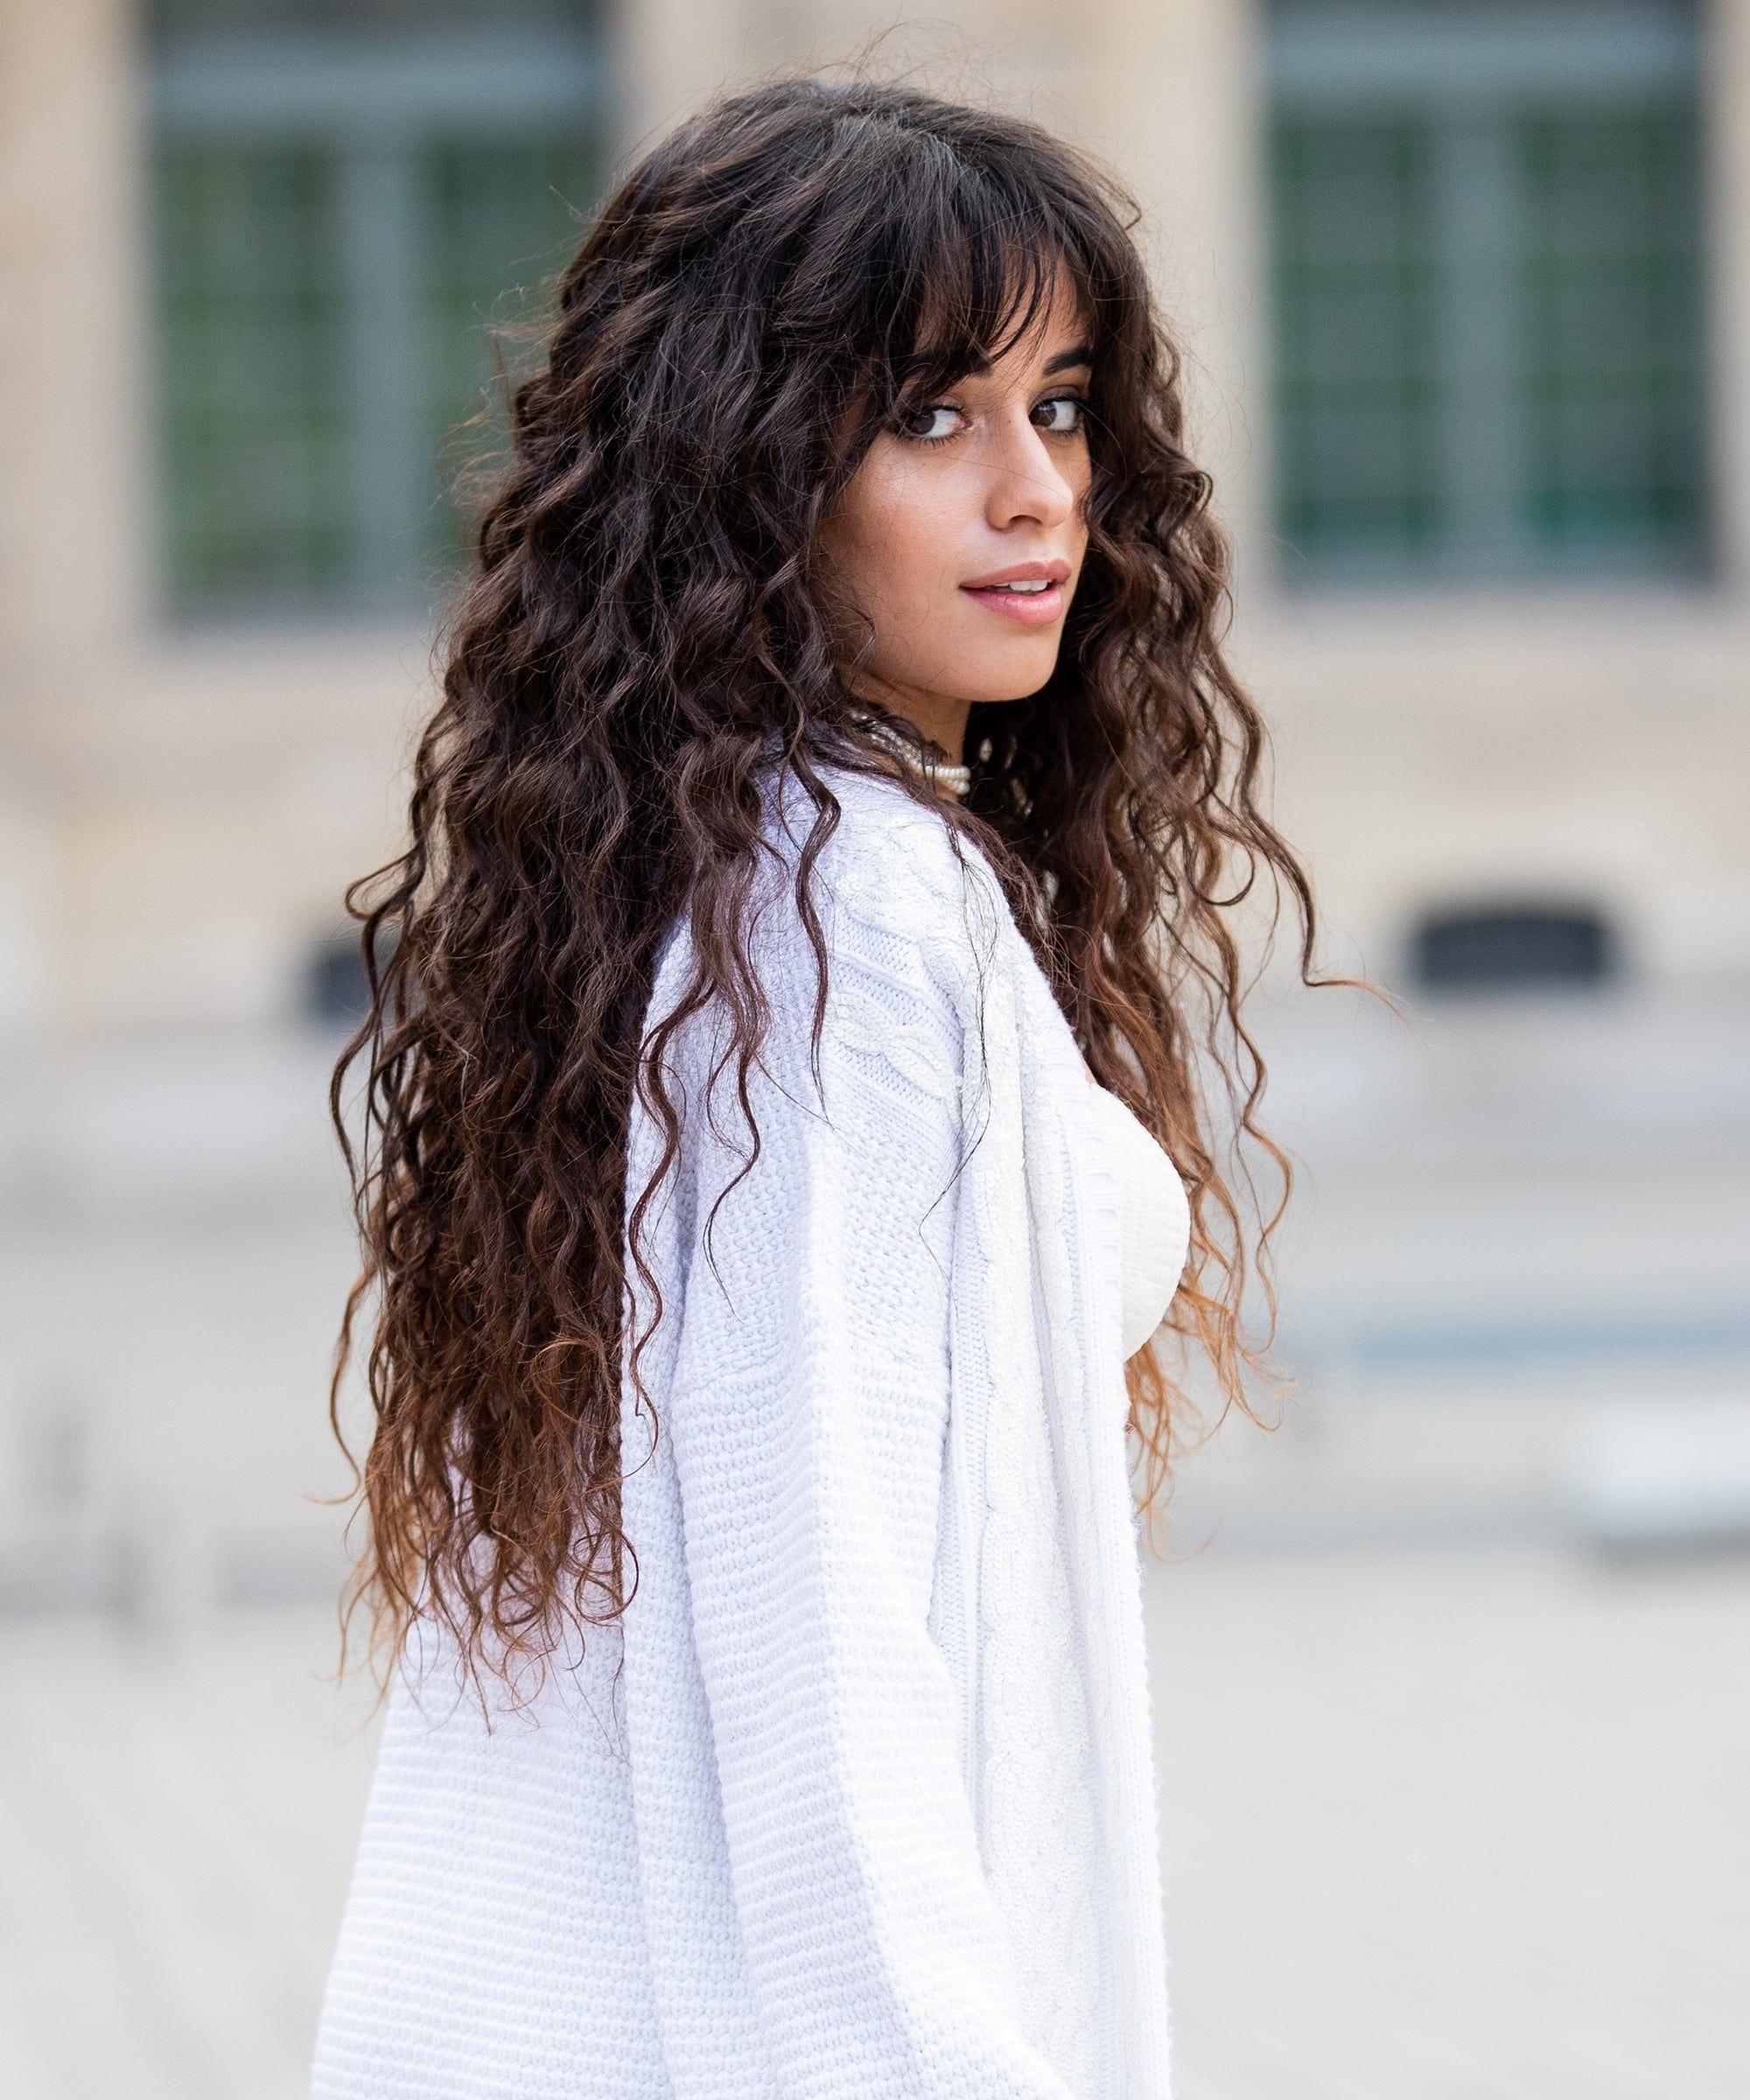 Camila Cabello Reveals Secret To Her Natural Curly Hair With Regard To Most Recent Slightly Curly Hair With Bangs (Photo 11 of 18)